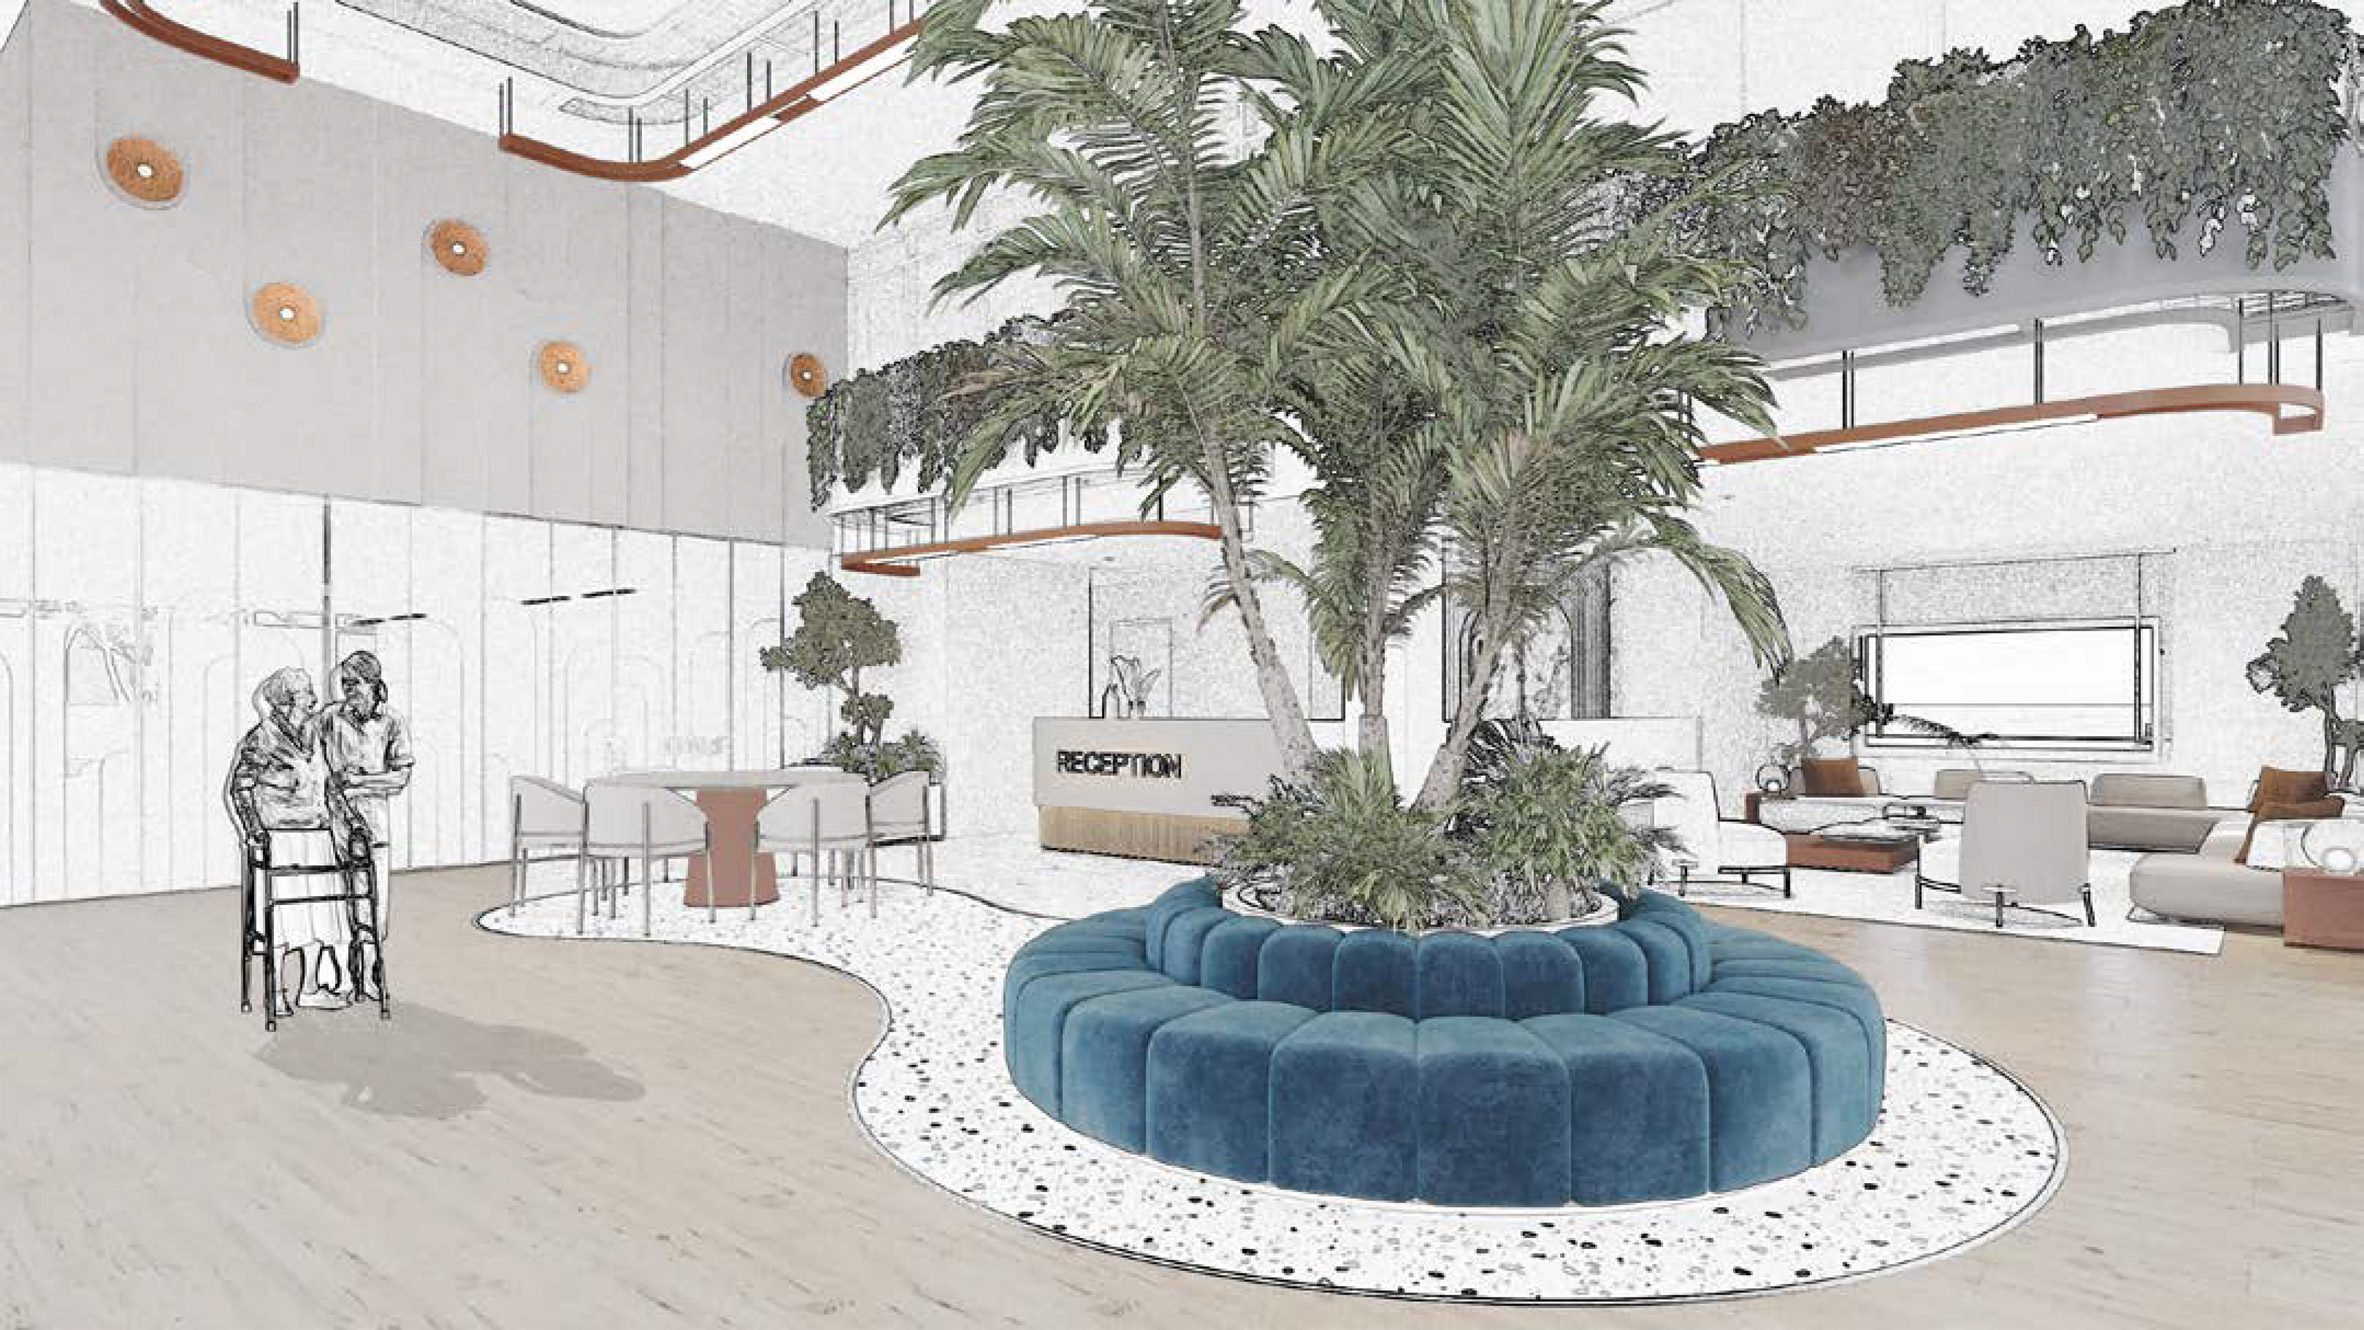 Visualisation showing interior of healthcare facility with palm trees